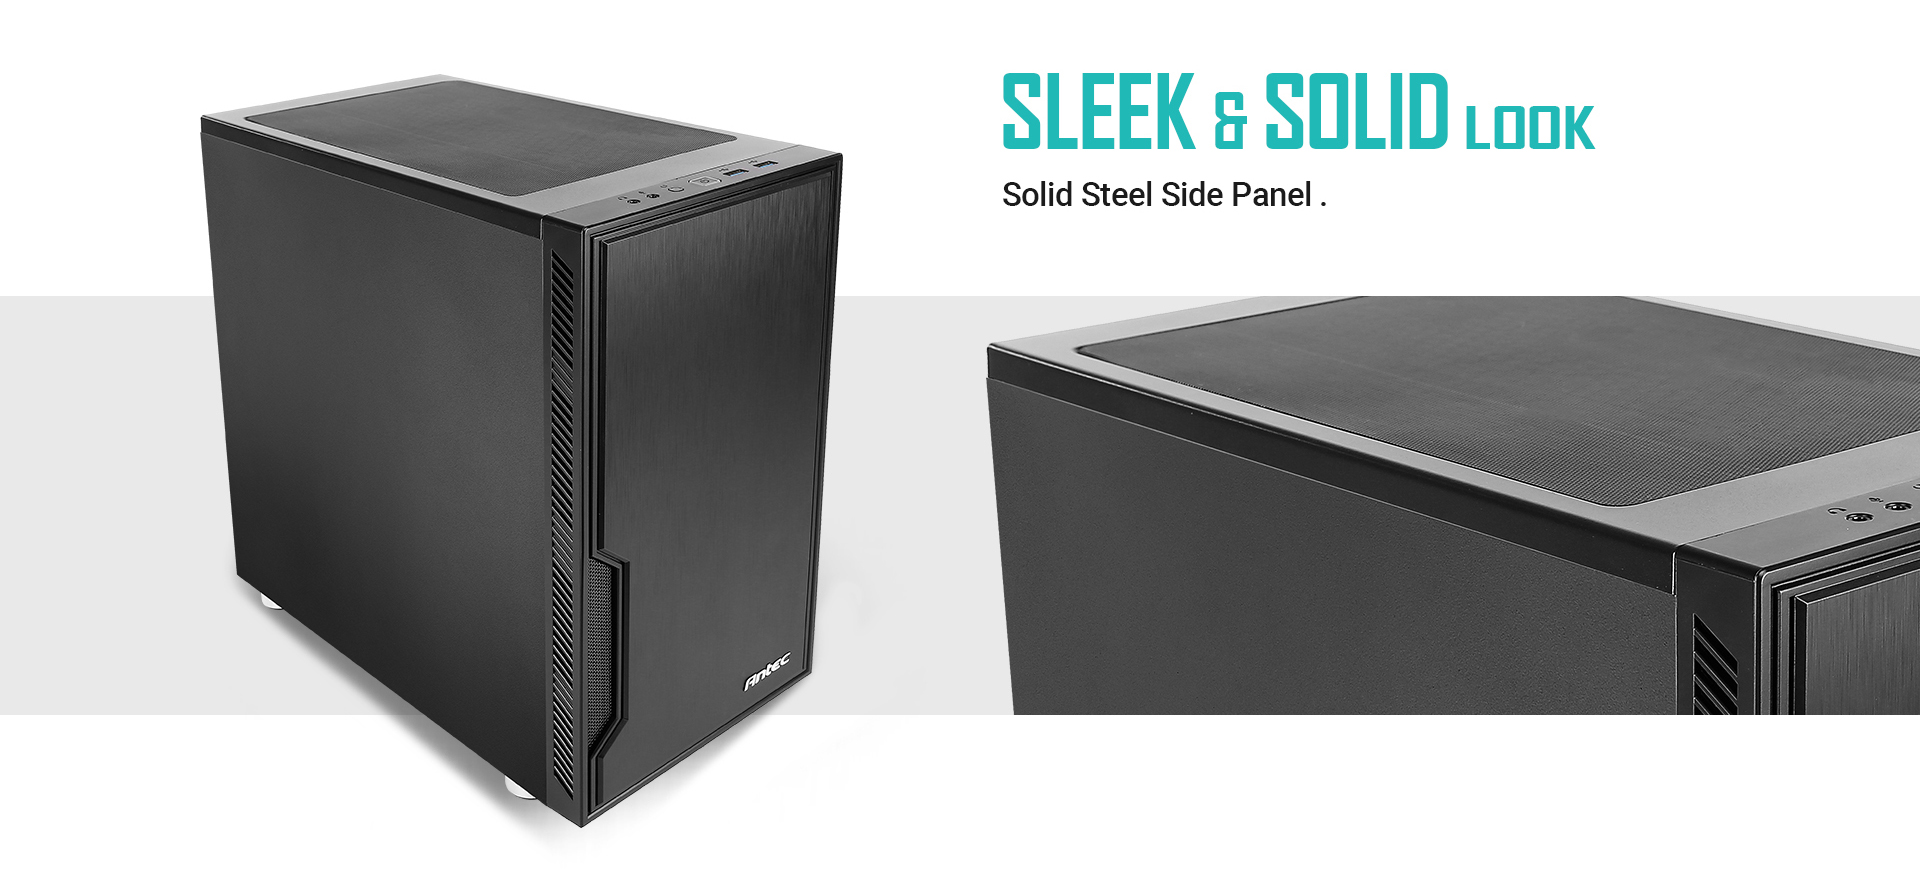 Antec Case Angled Up to the Right, and a Closeup of the Top of the case. there is text that reads: SLEEK & SOLID LOOK - Solid steel side panel.